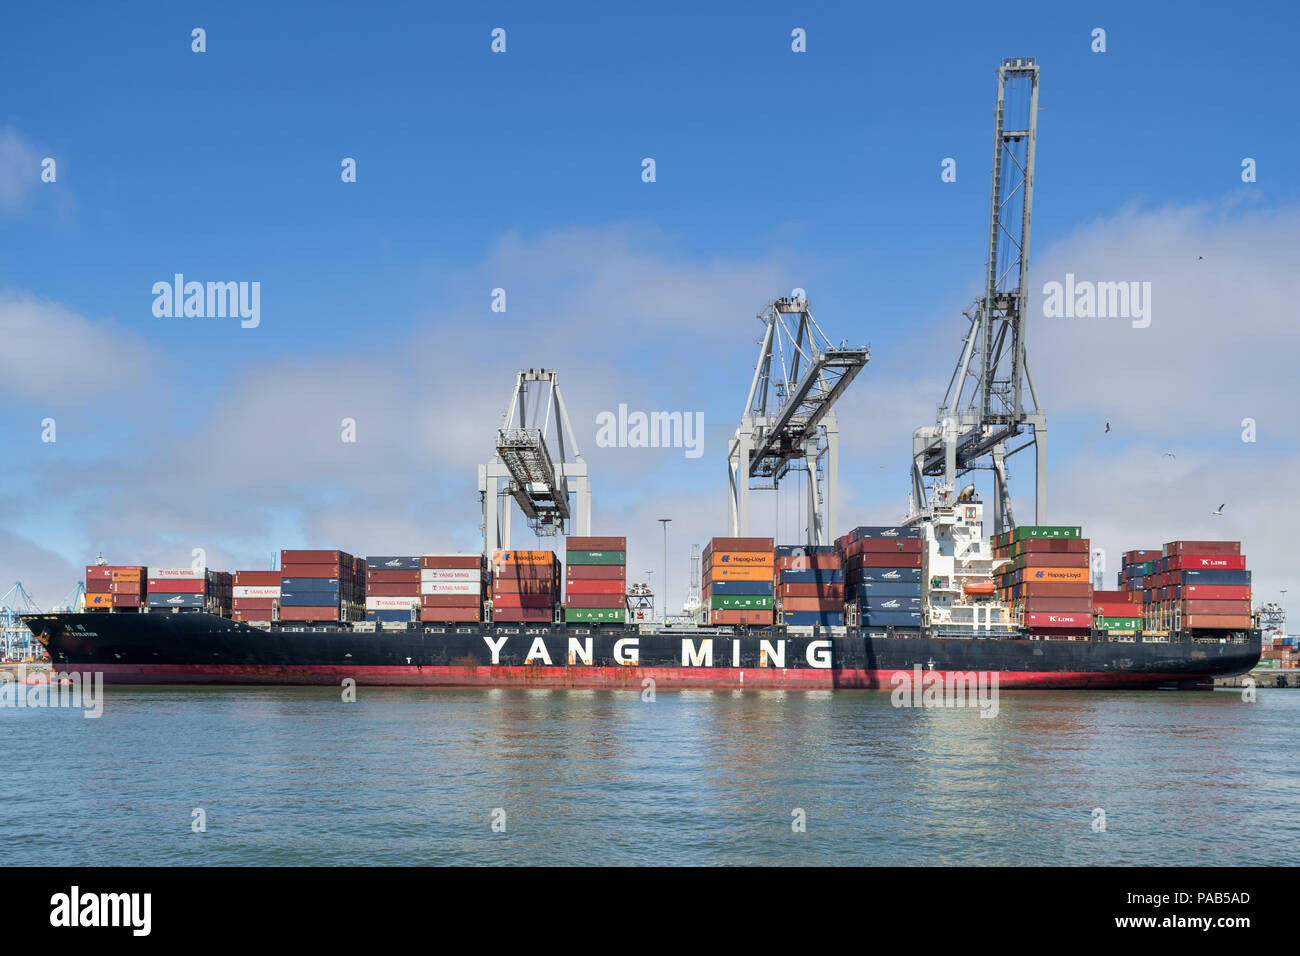 Containerschiff YM EVOLUTION an ECT Delta Terminal Rotterdam. Yang Ming Marine Transport ist ein Ocean Shipping Company in Keelung, Taiwan. Stockfoto